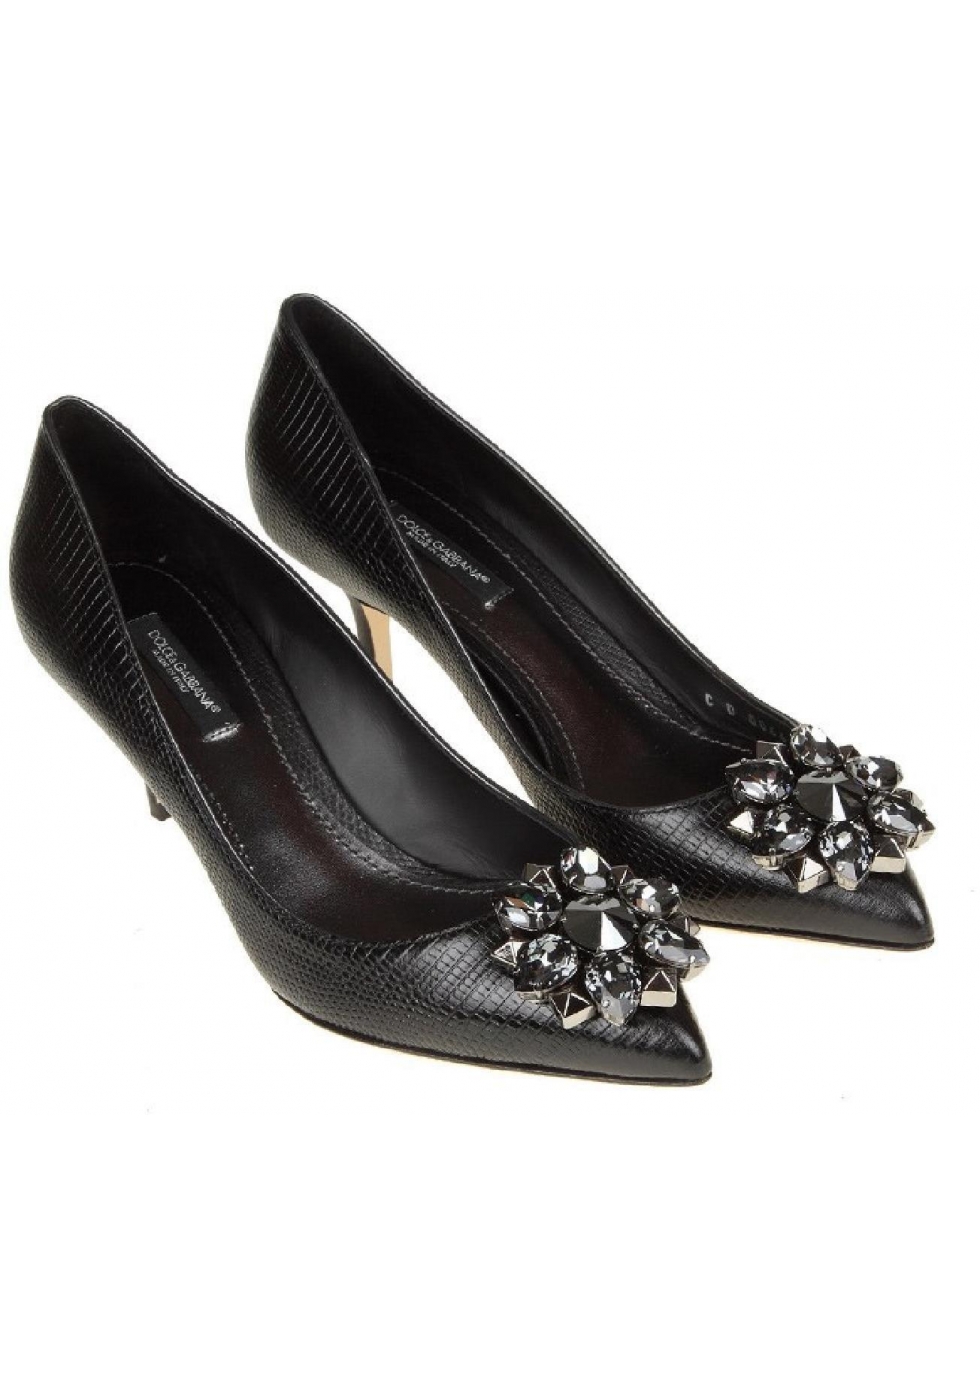 Dolce&Gabbana heels pumps in black leather with crystals